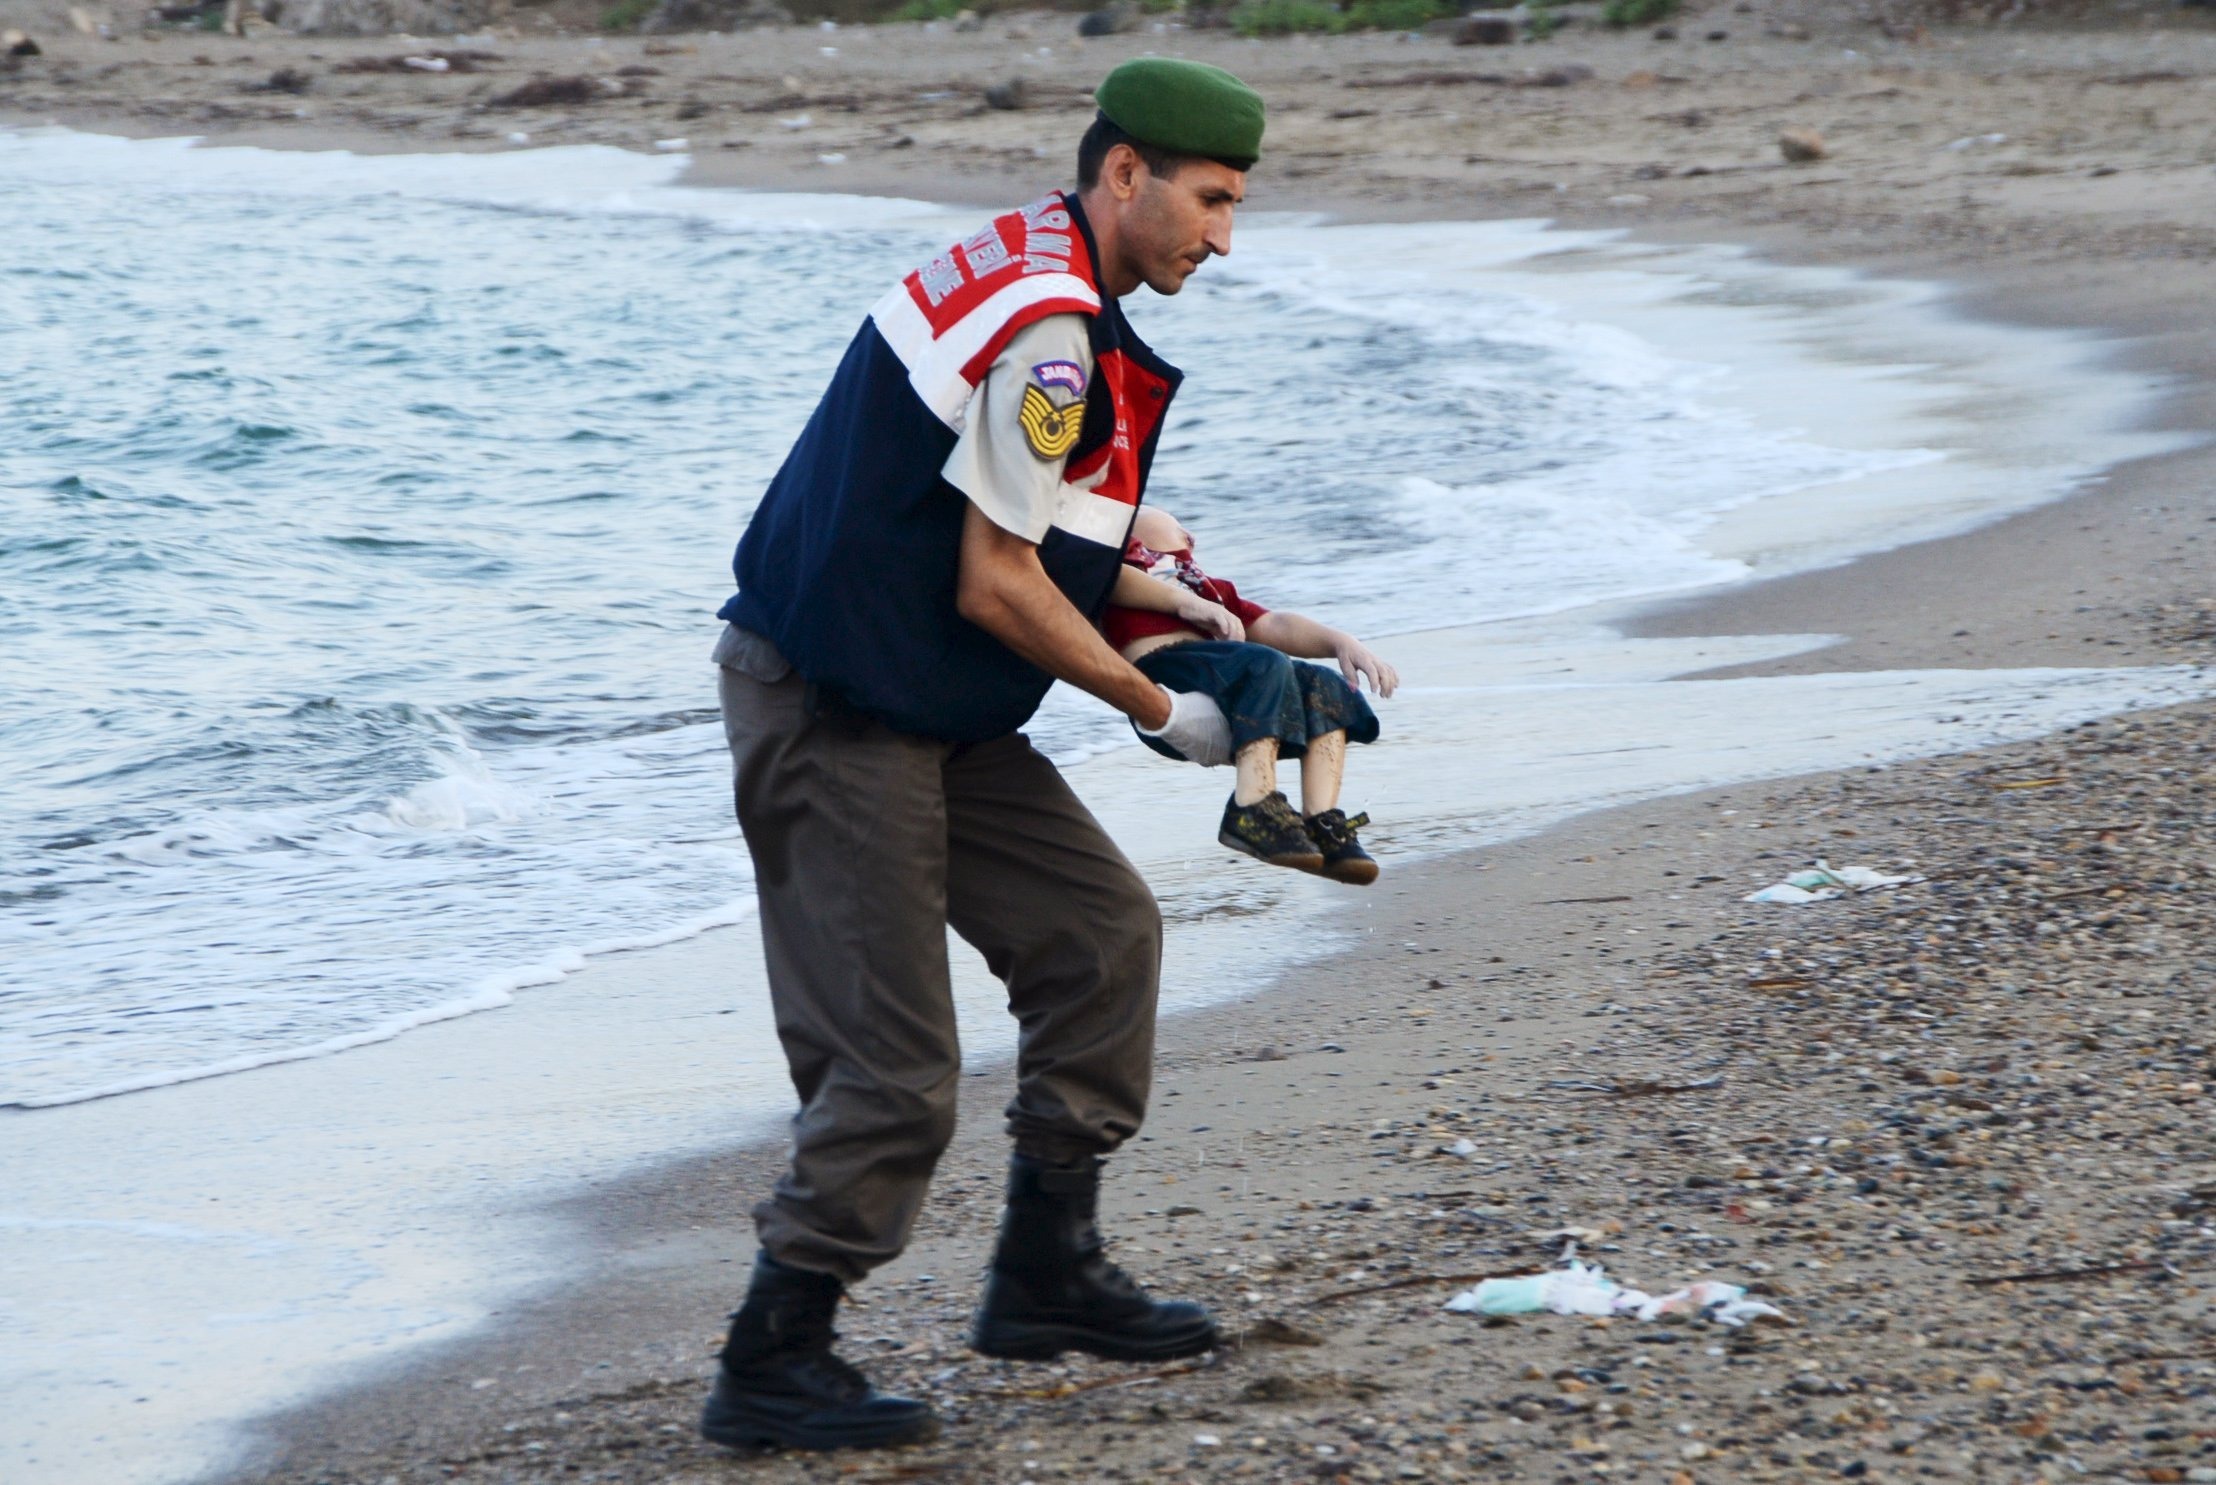 A Turkish gendarme carries the body of Alan Kurdi, 3, who drowned along with his brother Galip, 5, and their mother, in a failed attempt to sail to the Greek island of Kos, in the coastal town of Bodrum, Turkey, on Sept. 2, 2015. (Reuters)